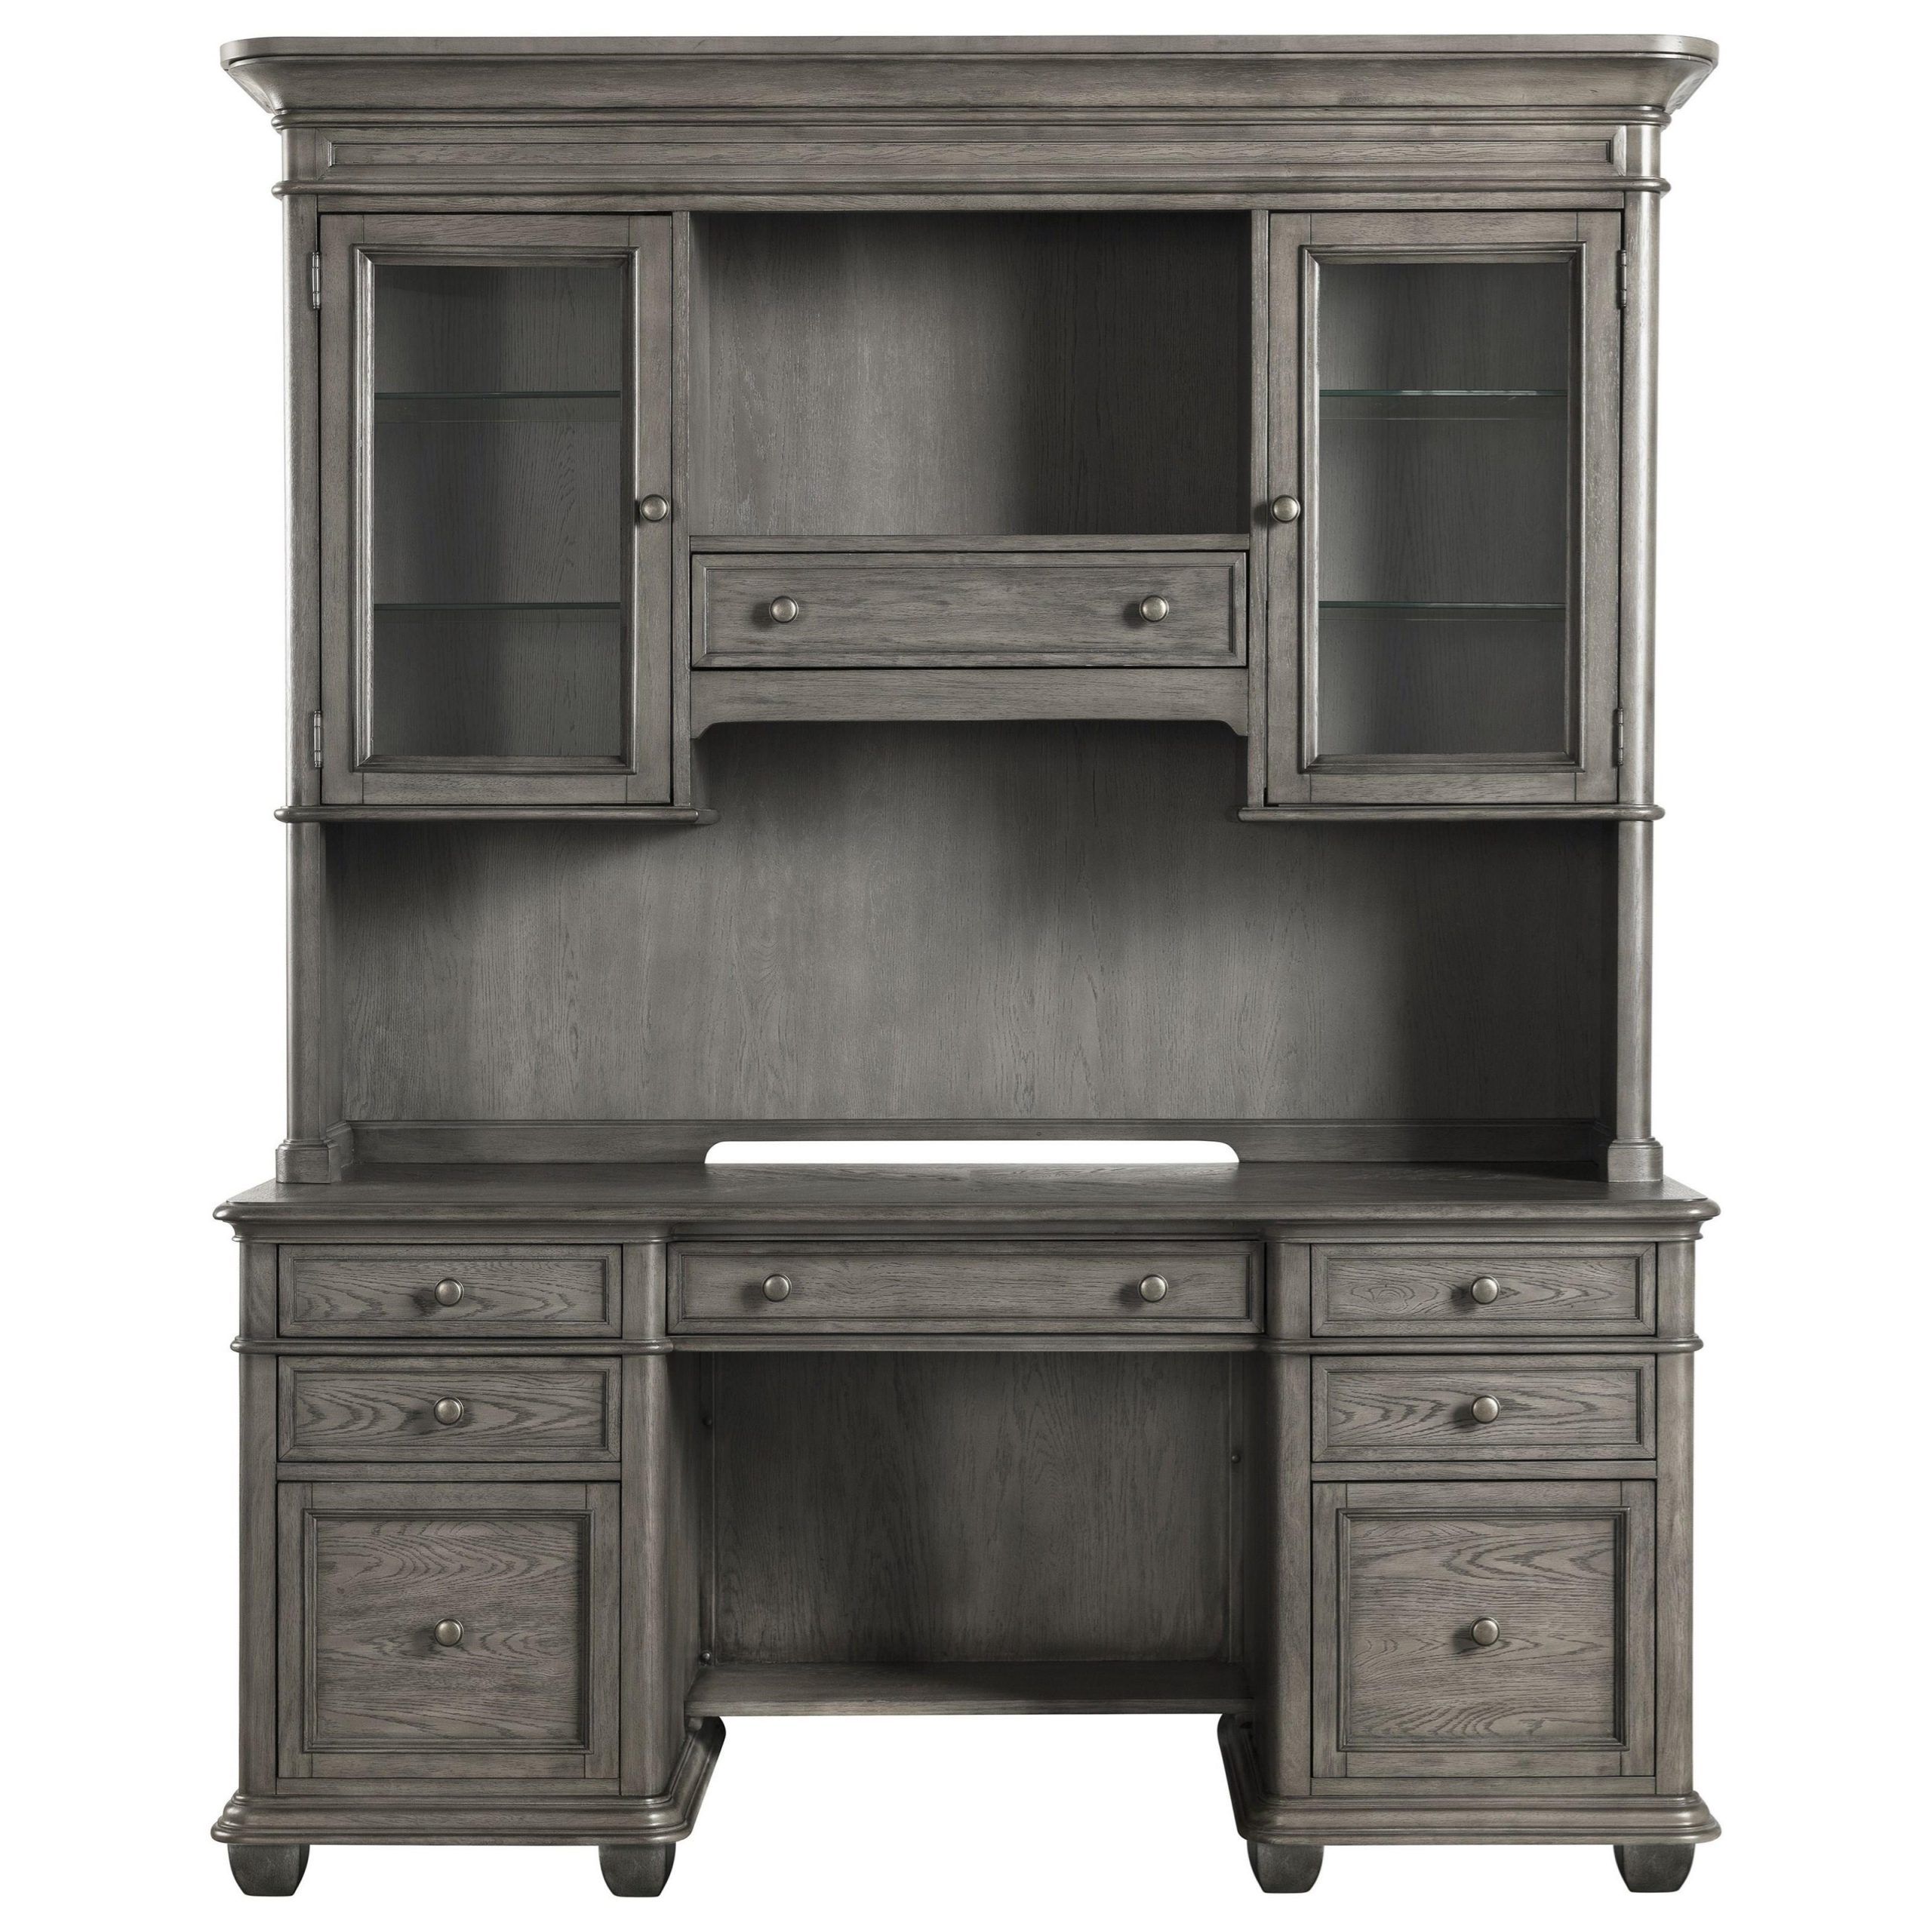 Riverside Furniture Sloane Transitional 6 Drawer Credenza Desk | Sheely With Office Desks With Filing Credenza (View 8 of 15)